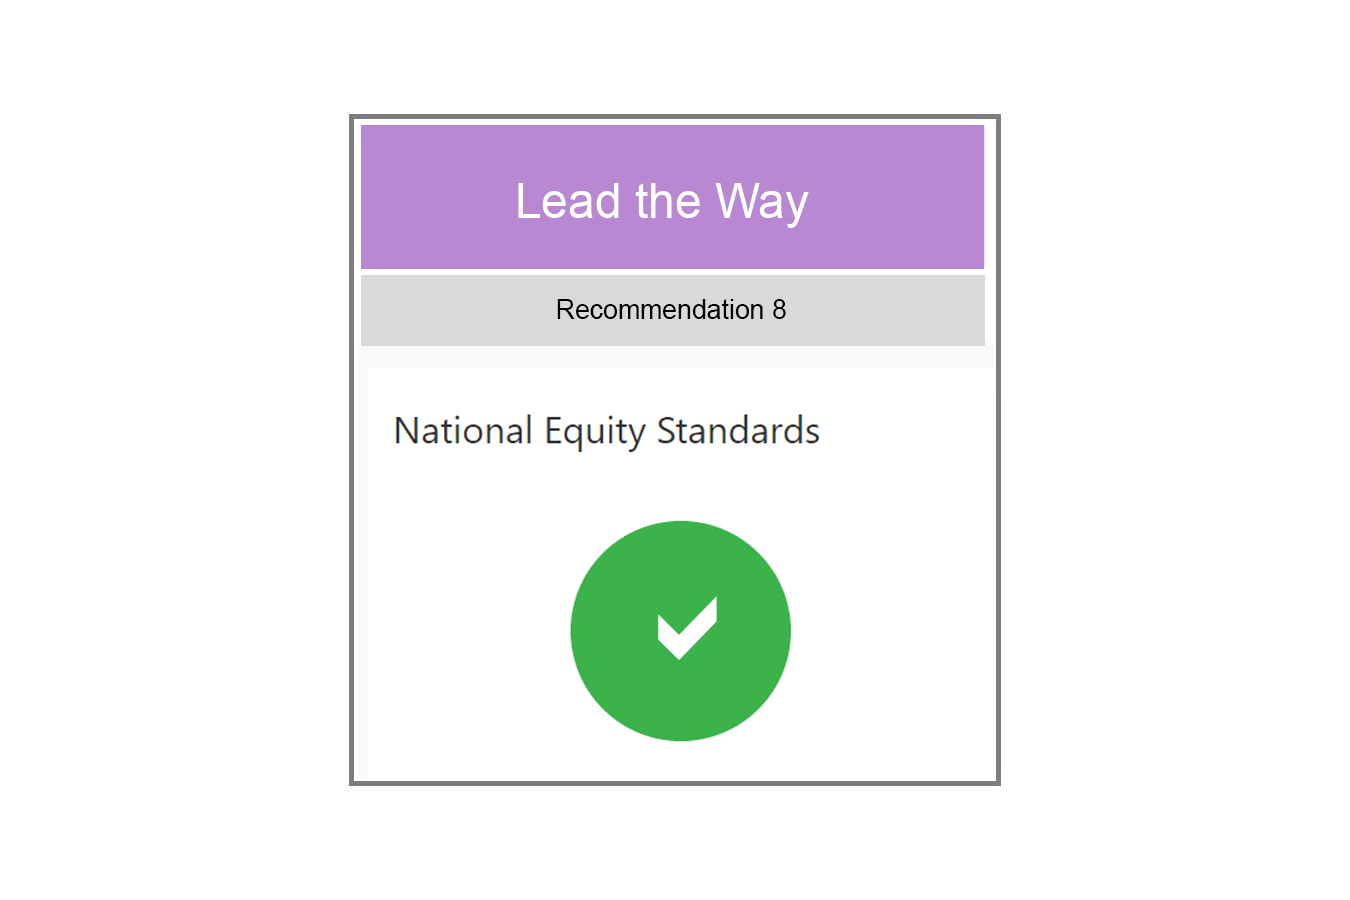 Lead the way recommendation 8 graphic 